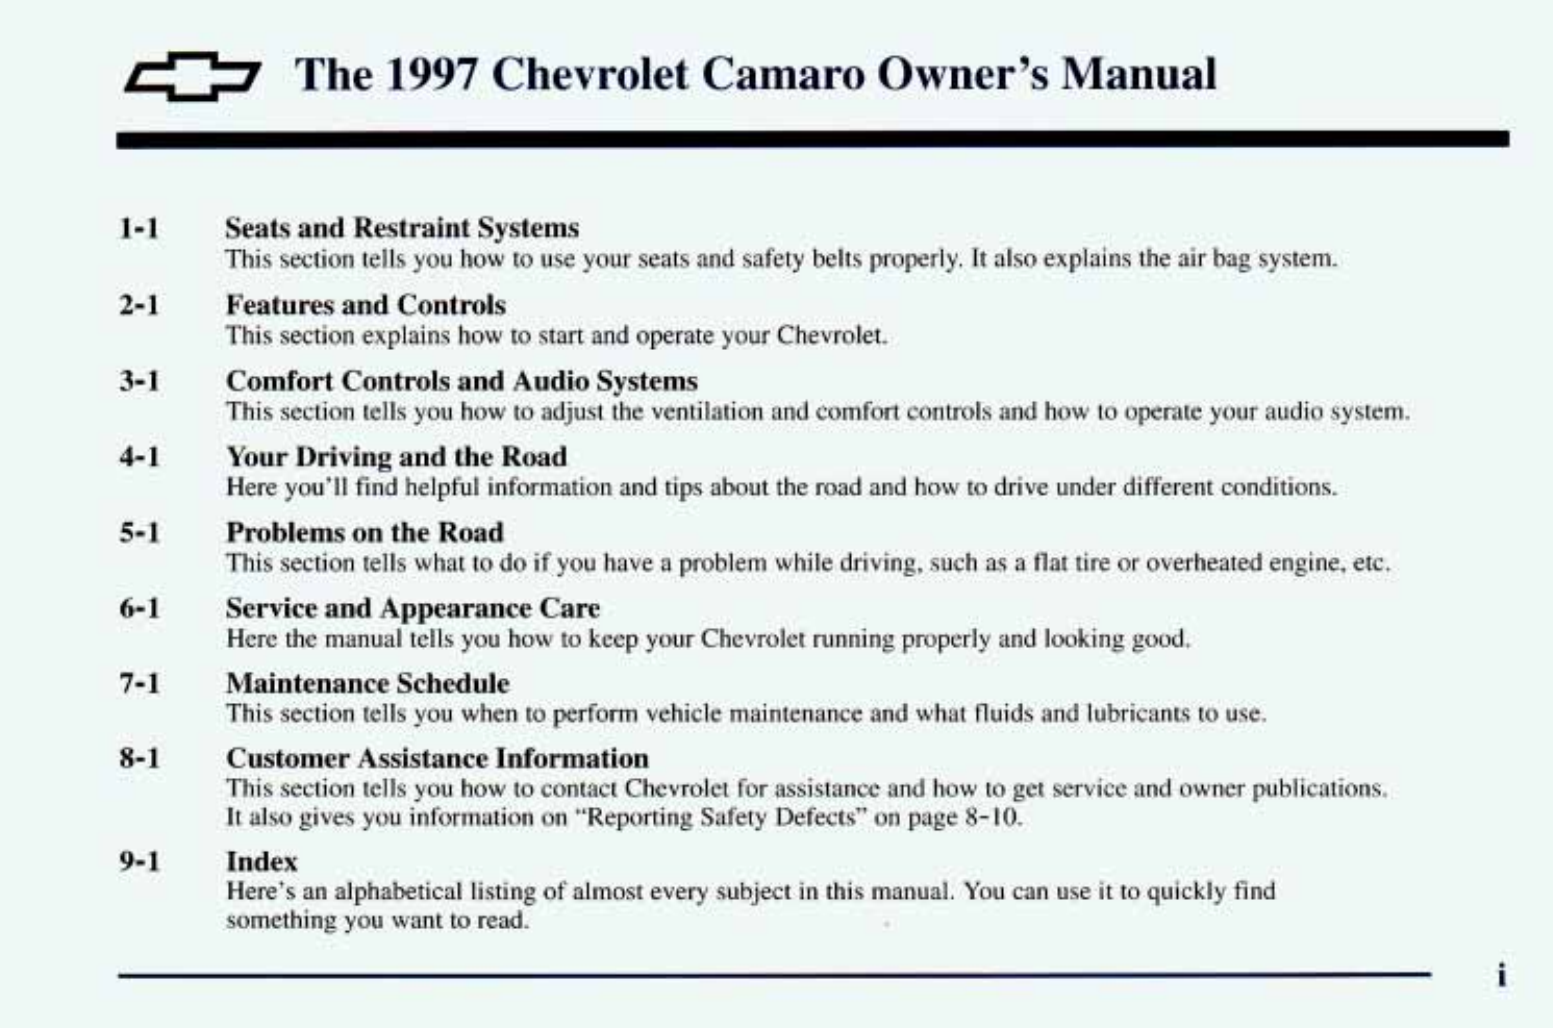 1997 Chevrolet Camaro owners manual Preview image 3